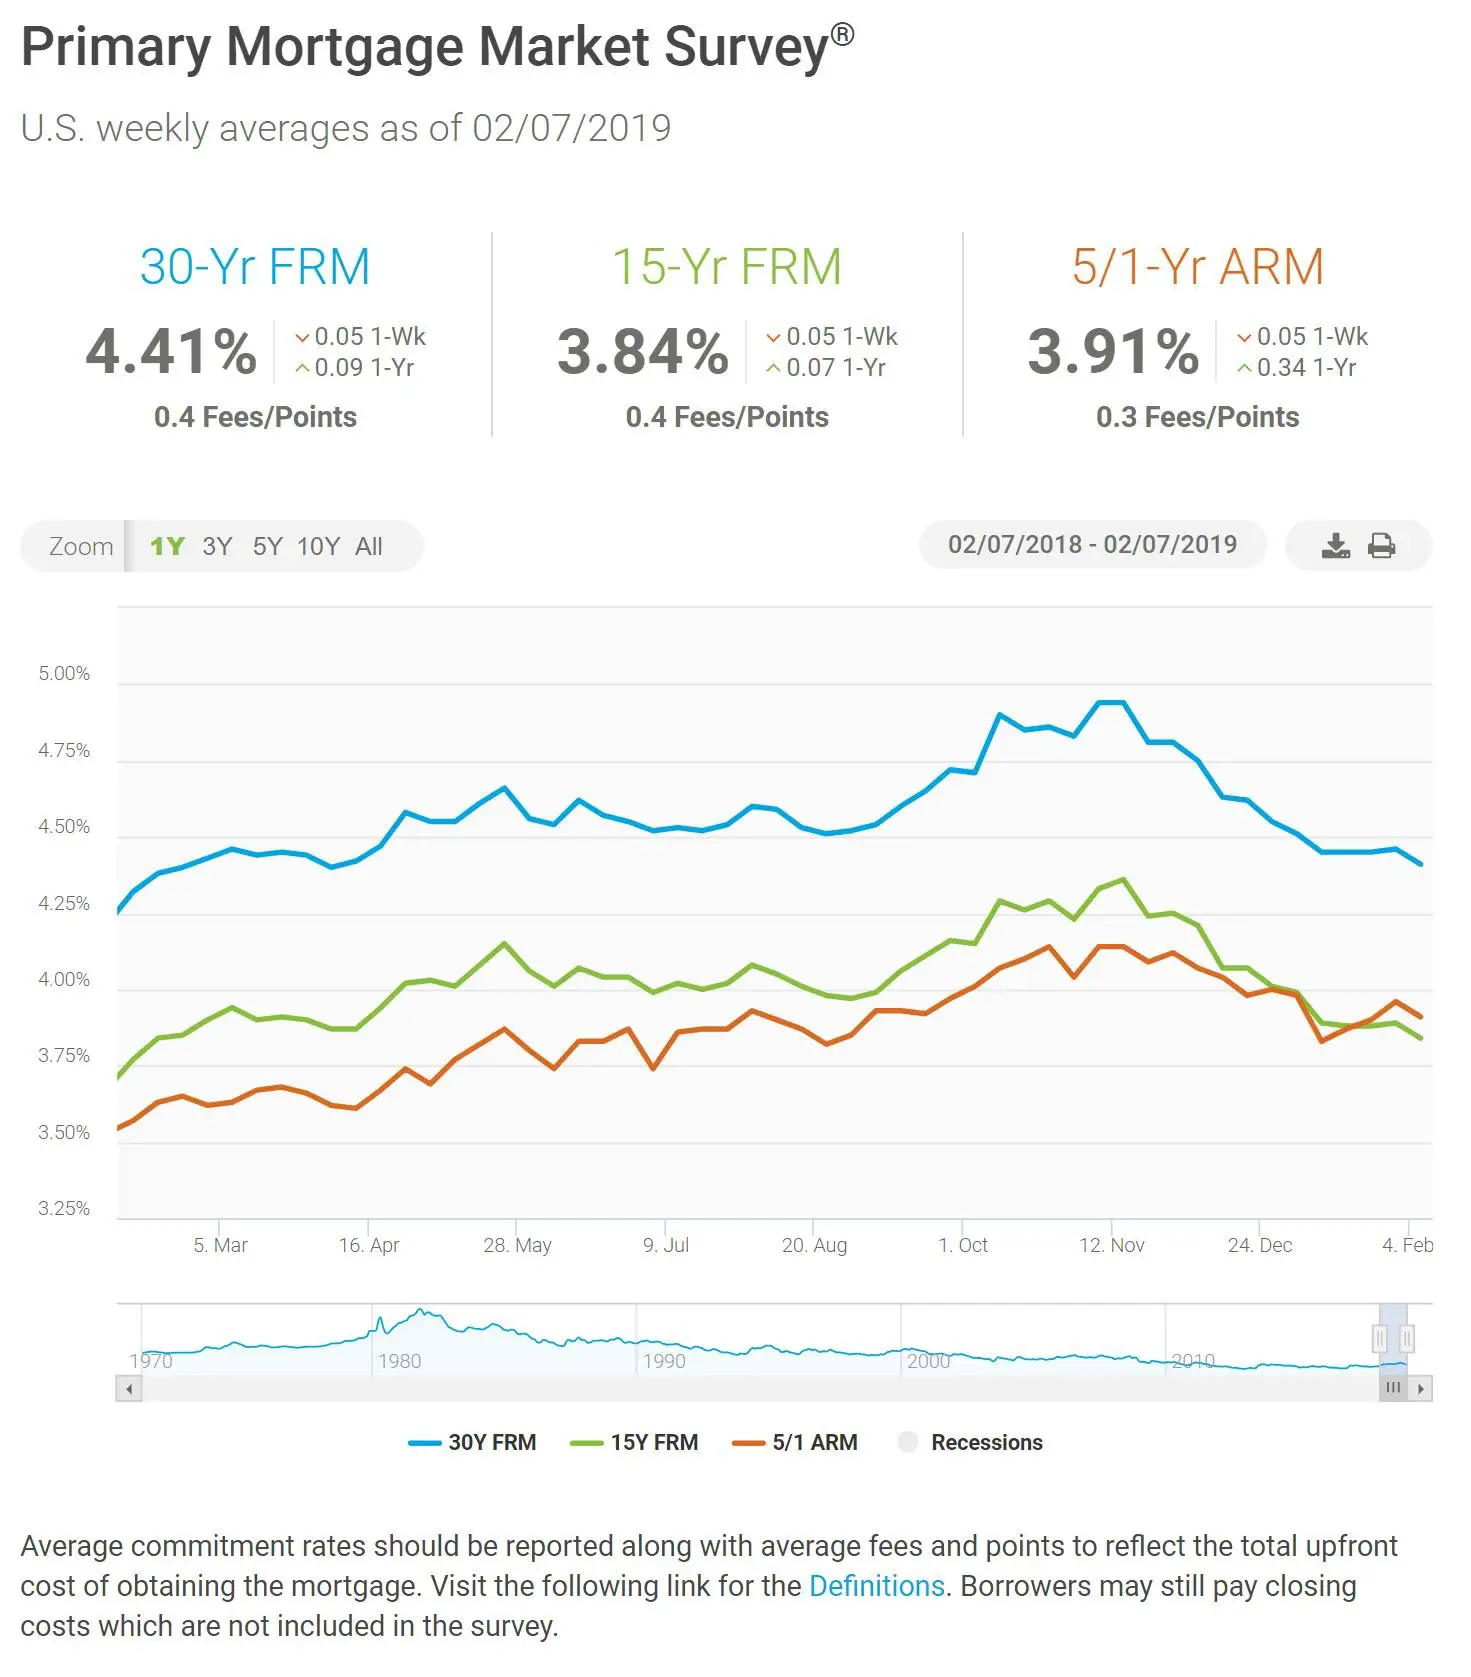 Mortgage Rates Drop to Lowest in 10 Months!